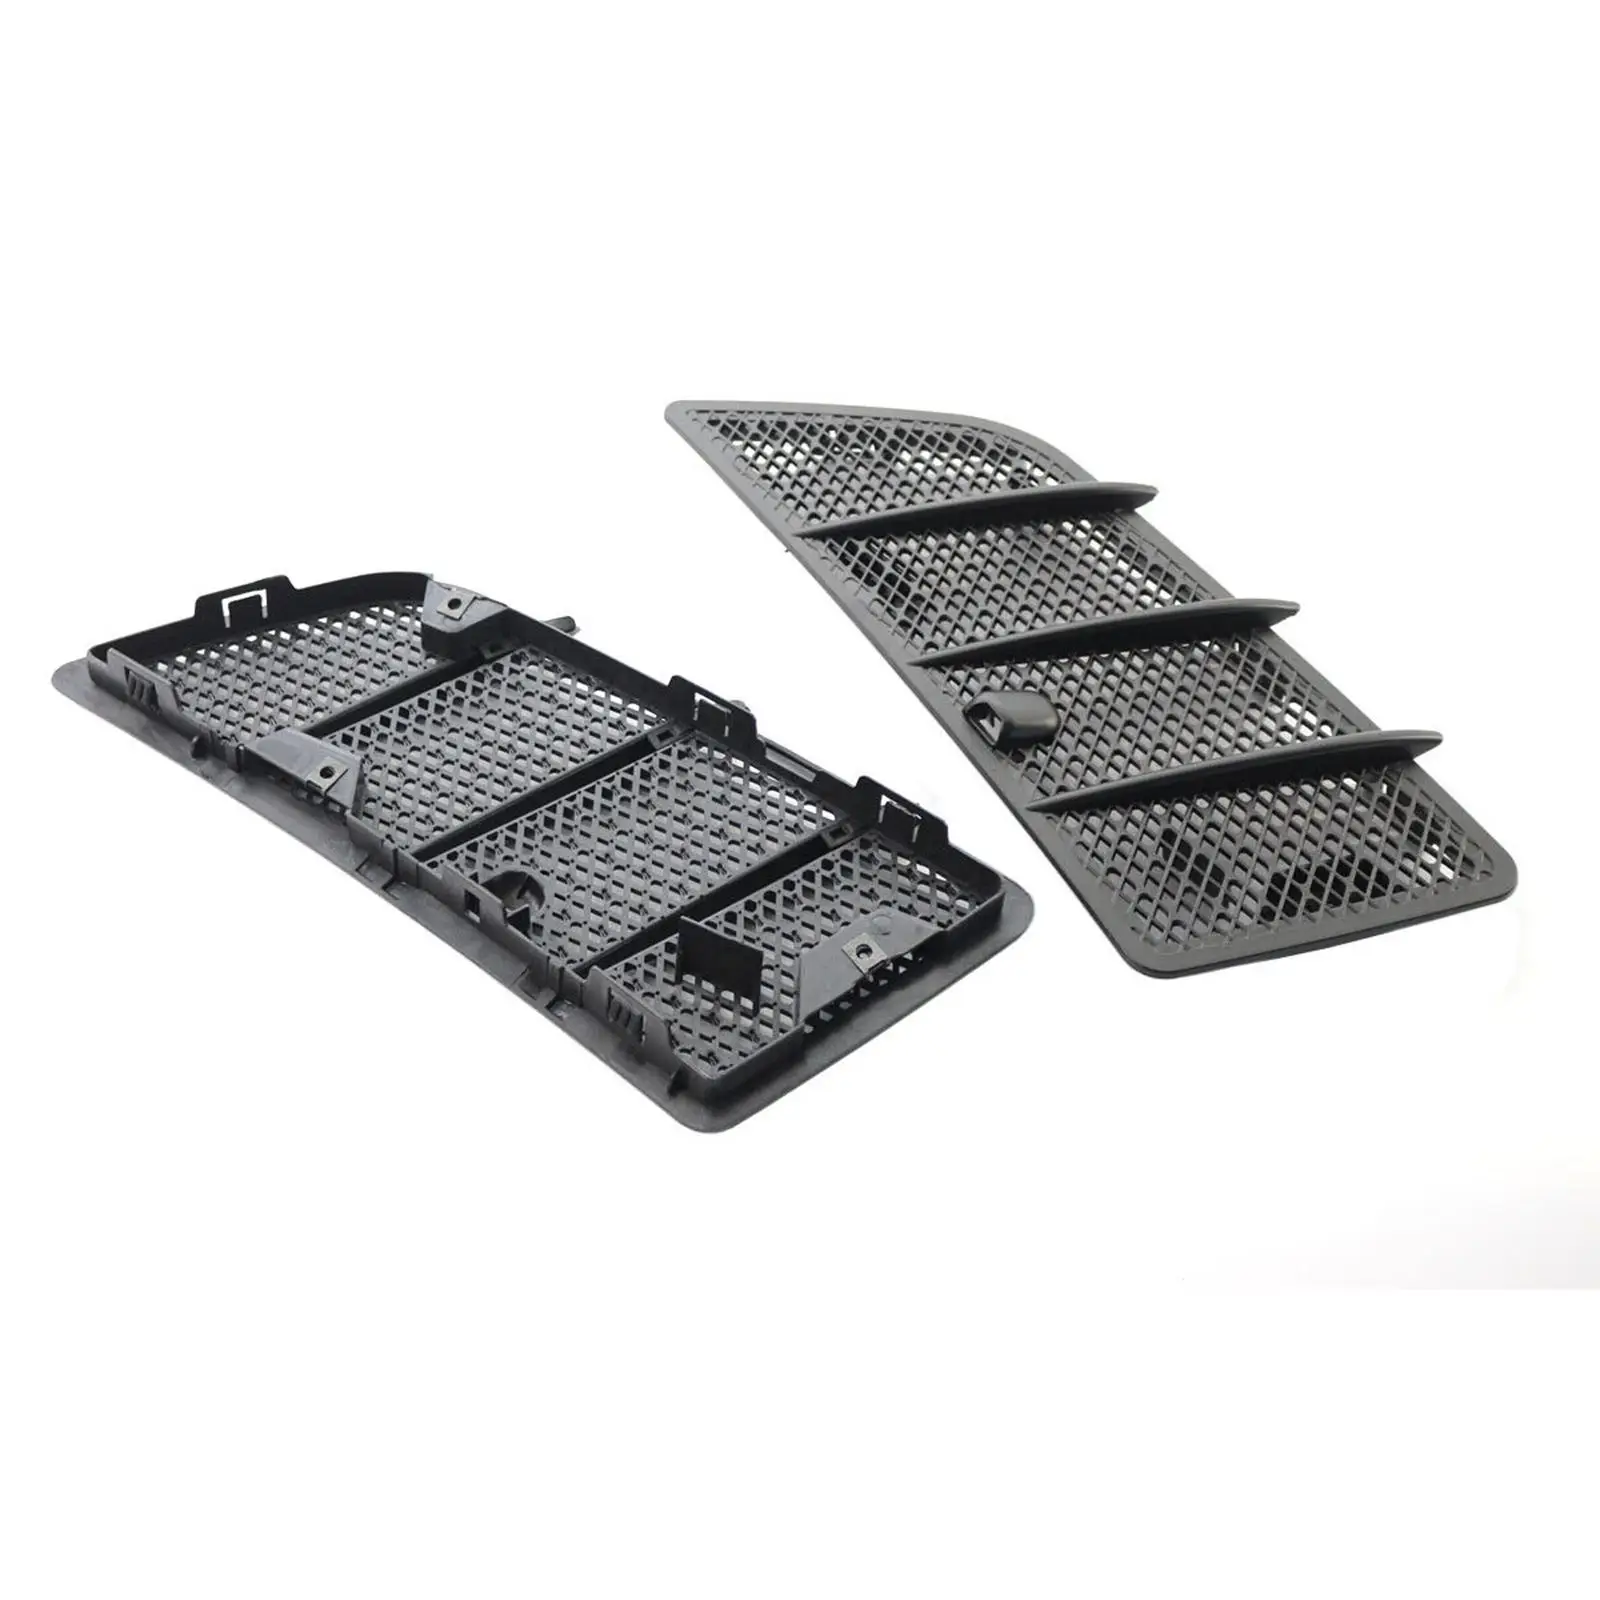 Hood Air Vent Grille Cover Insert Mesh High Quality Black Durable Directly Replace for W164 ml GL Class Accessory